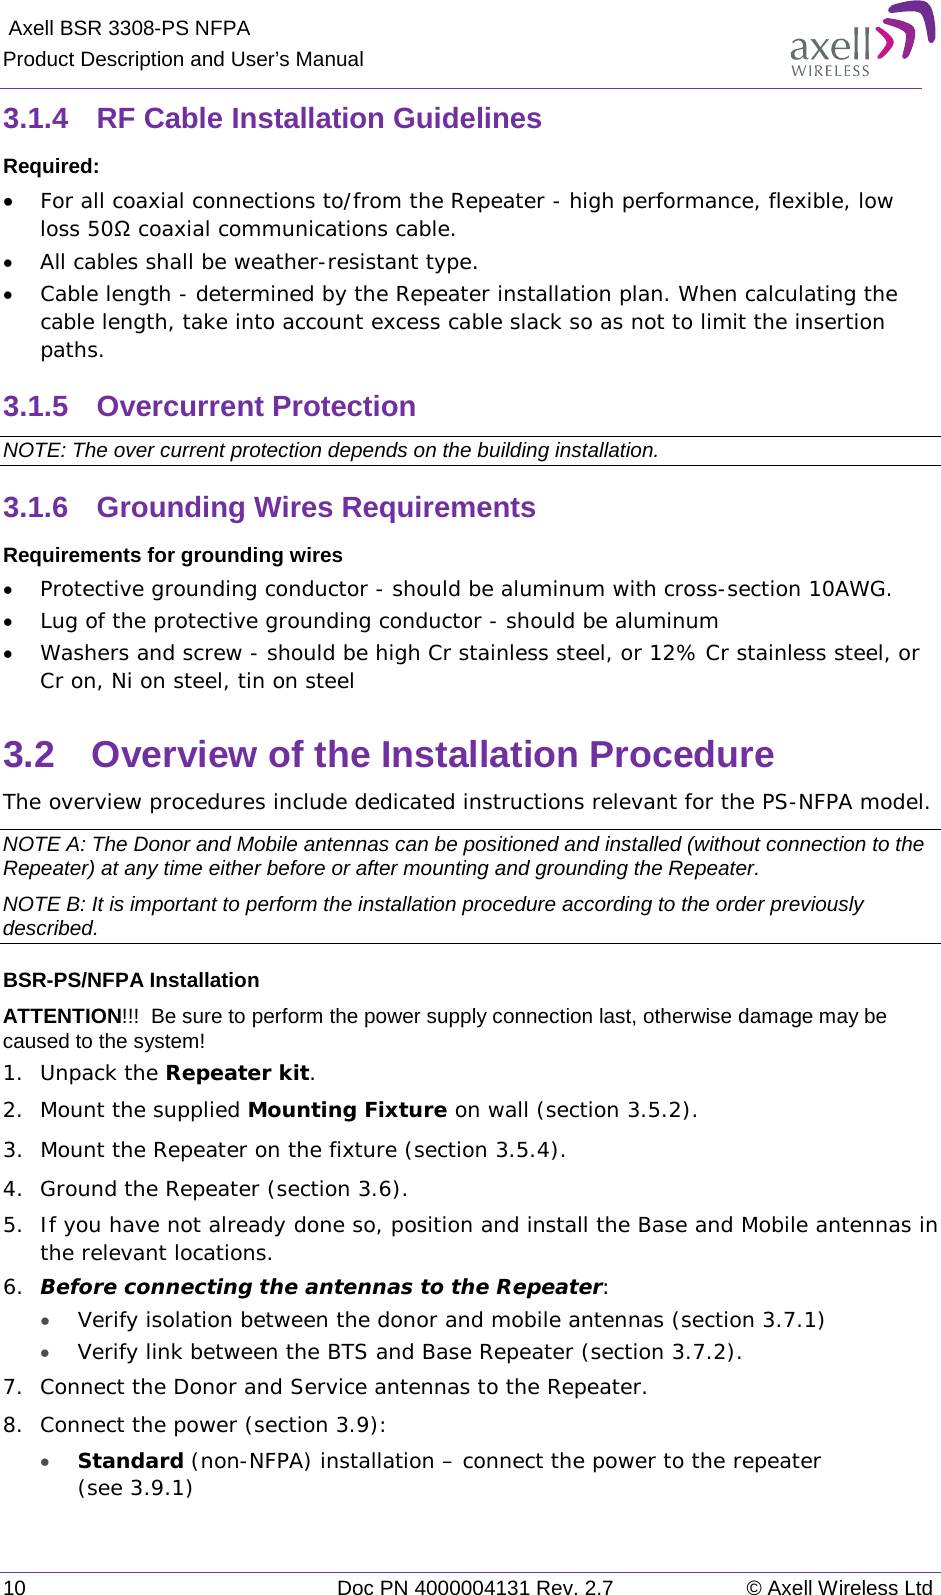  Axell BSR 3308-PS NFPA Product Description and User’s Manual 10 Doc PN 4000004131 Rev. 2.7 © Axell Wireless Ltd  3.1.4  RF Cable Installation Guidelines Required: • For all coaxial connections to/from the Repeater - high performance, flexible, low loss 50Ω coaxial communications cable.  • All cables shall be weather-resistant type.  • Cable length - determined by the Repeater installation plan. When calculating the cable length, take into account excess cable slack so as not to limit the insertion paths. 3.1.5  Overcurrent Protection NOTE: The over current protection depends on the building installation. 3.1.6  Grounding Wires Requirements Requirements for grounding wires • Protective grounding conductor - should be aluminum with cross-section 10AWG.  • Lug of the protective grounding conductor - should be aluminum • Washers and screw - should be high Cr stainless steel, or 12% Cr stainless steel, or Cr on, Ni on steel, tin on steel  3.2  Overview of the Installation Procedure The overview procedures include dedicated instructions relevant for the PS-NFPA model. NOTE A: The Donor and Mobile antennas can be positioned and installed (without connection to the Repeater) at any time either before or after mounting and grounding the Repeater.  NOTE B: It is important to perform the installation procedure according to the order previously described. BSR-PS/NFPA Installation ATTENTION!!!  Be sure to perform the power supply connection last, otherwise damage may be caused to the system! 1.  Unpack the Repeater kit. 2.  Mount the supplied Mounting Fixture on wall (section  3.5.2). 3.  Mount the Repeater on the fixture (section  3.5.4). 4.  Ground the Repeater (section  3.6). 5.  If you have not already done so, position and install the Base and Mobile antennas in the relevant locations.  6.  Before connecting the antennas to the Repeater: • Verify isolation between the donor and mobile antennas (section  3.7.1) • Verify link between the BTS and Base Repeater (section  3.7.2). 7.  Connect the Donor and Service antennas to the Repeater. 8.  Connect the power (section  3.9):  • Standard (non-NFPA) installation – connect the power to the repeater (see  3.9.1) 